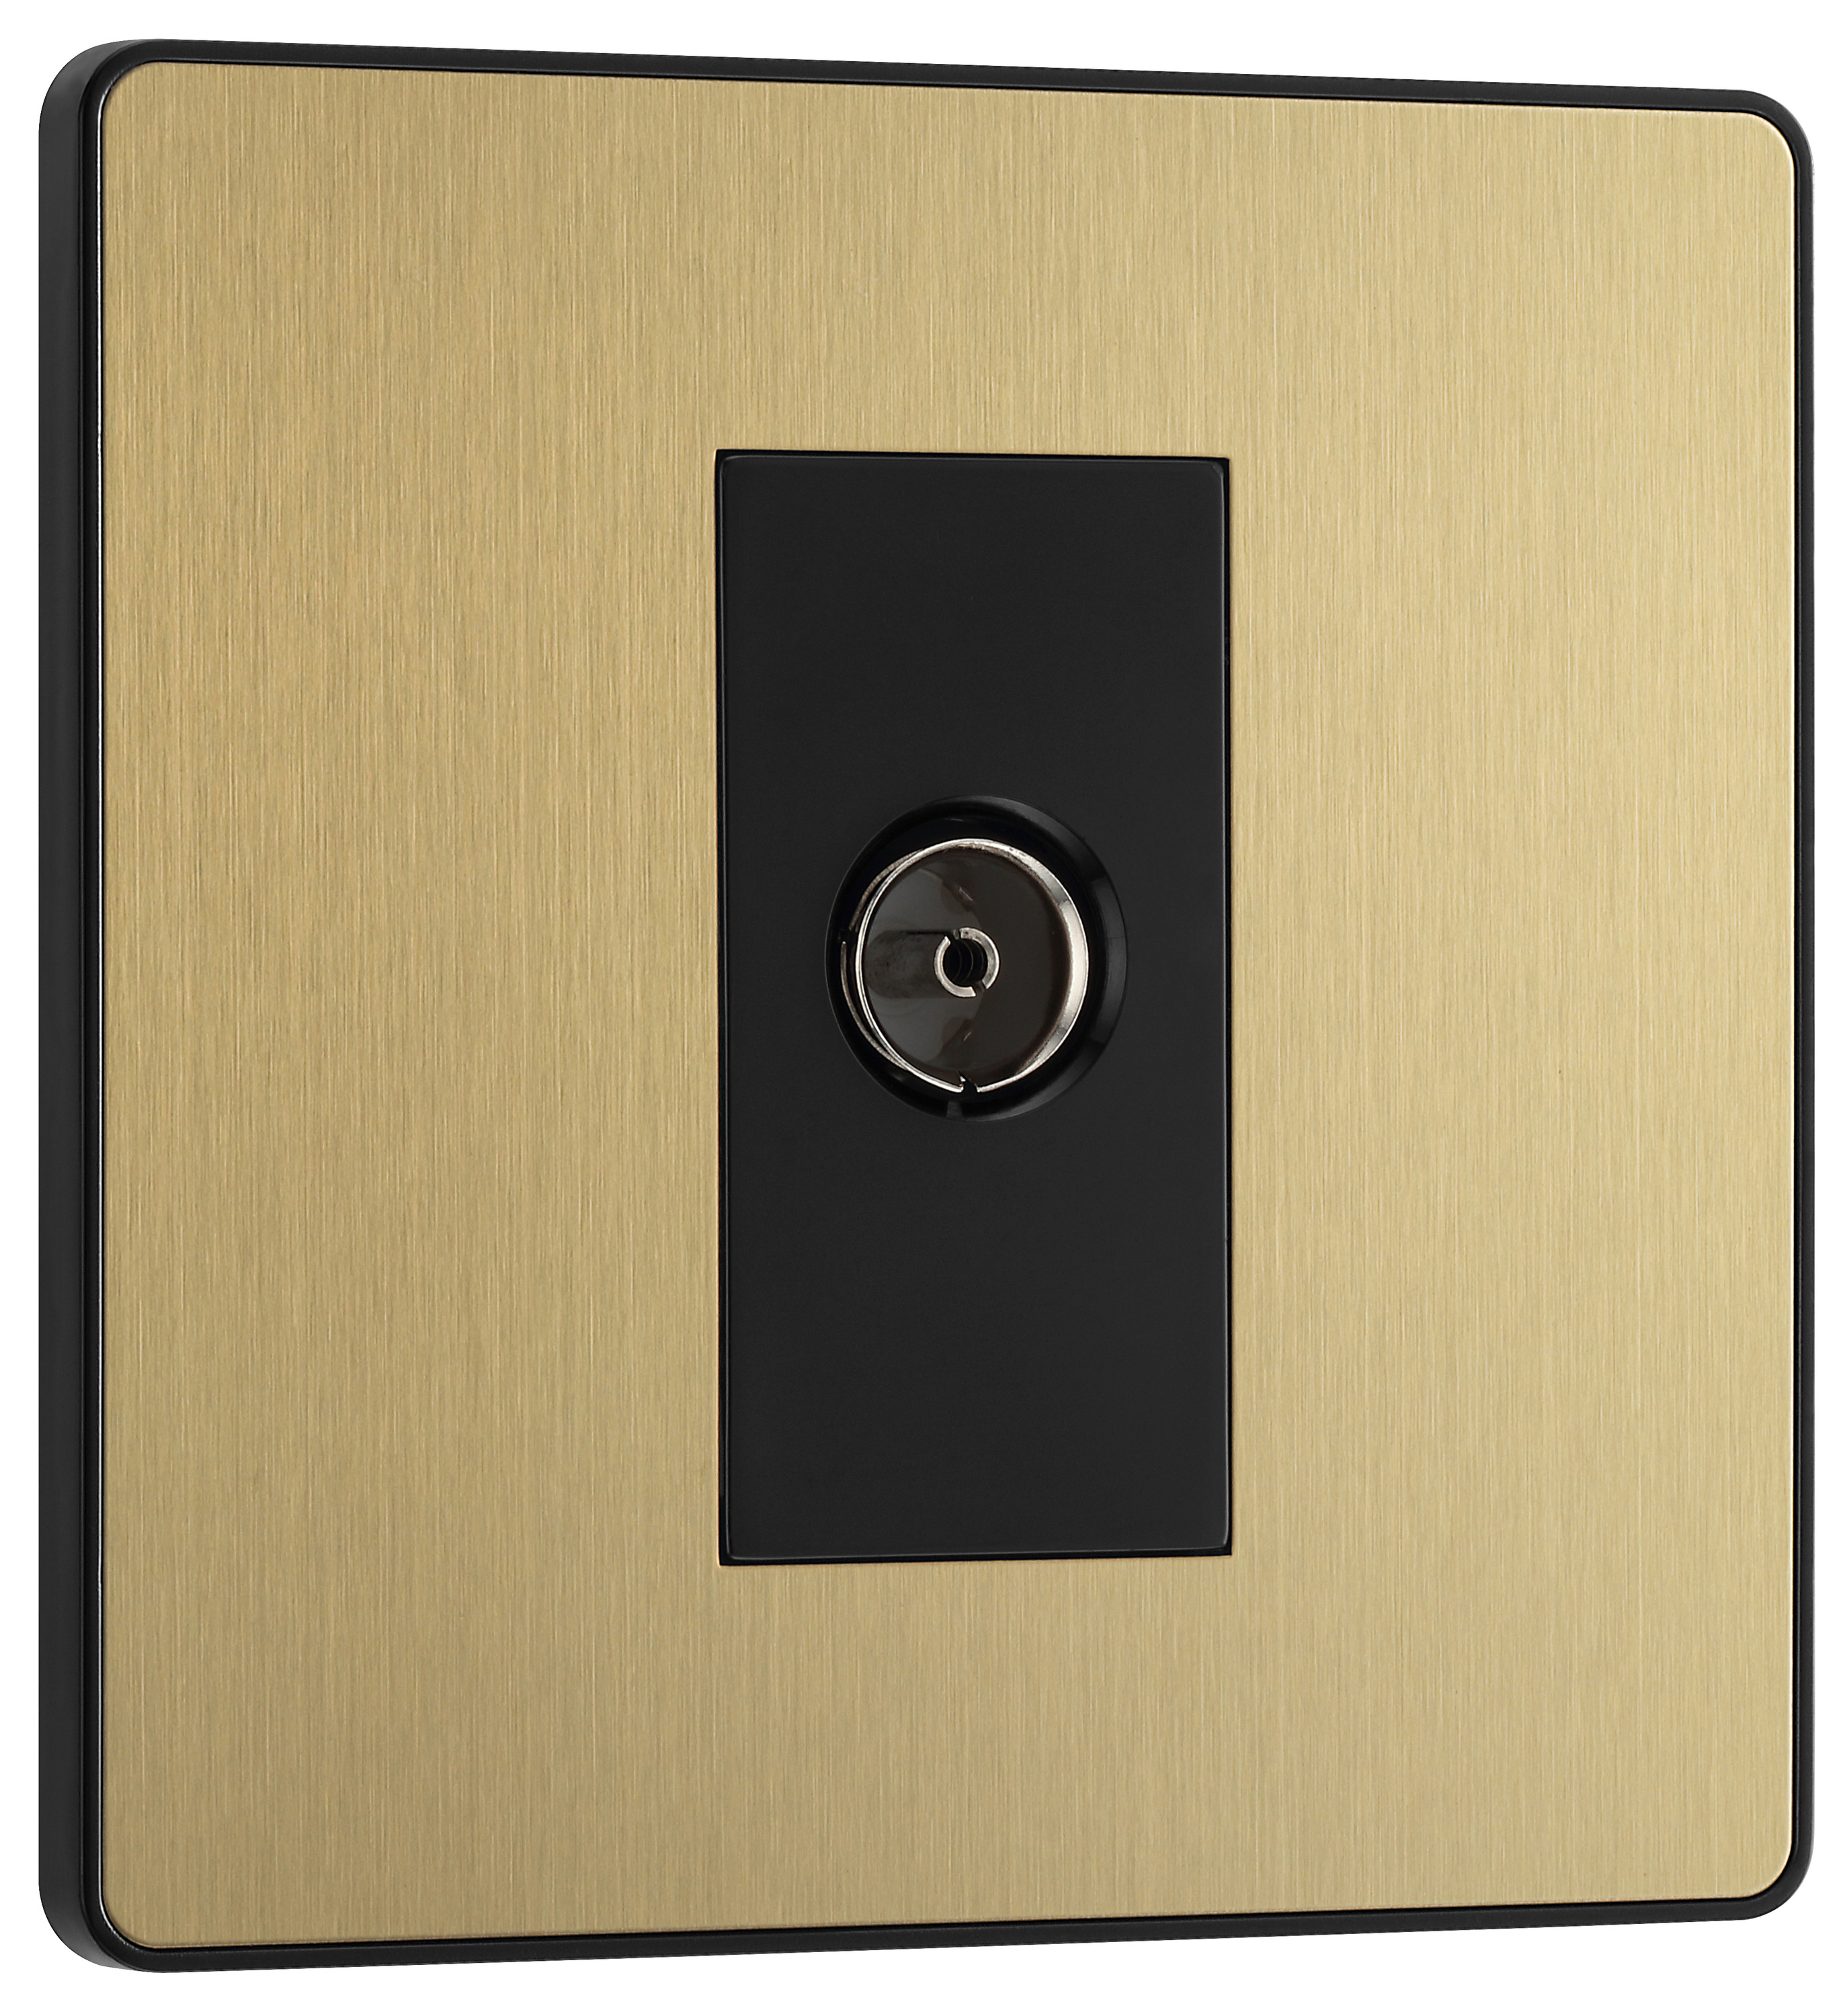 Image of BG Evolve Brushed Brass Single Socket For TV or FM Co-Axial Aerial Connection